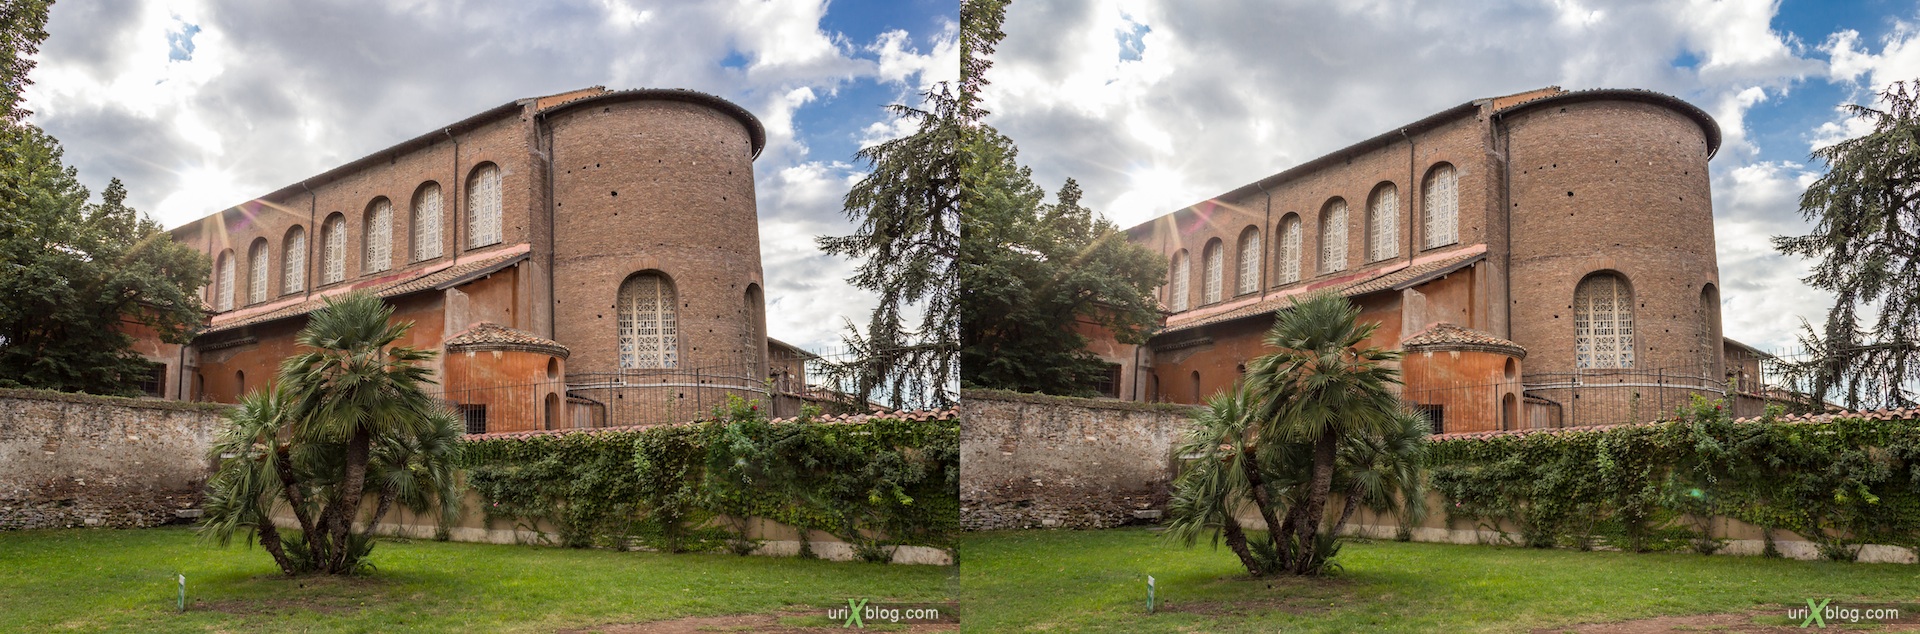 2012, basilica of Santa Sabina, church, Rome, Italy, cathedral, monastery, Christianity, Catholicism, 3D, stereo pair, cross-eyed, crossview, cross view stereo pair